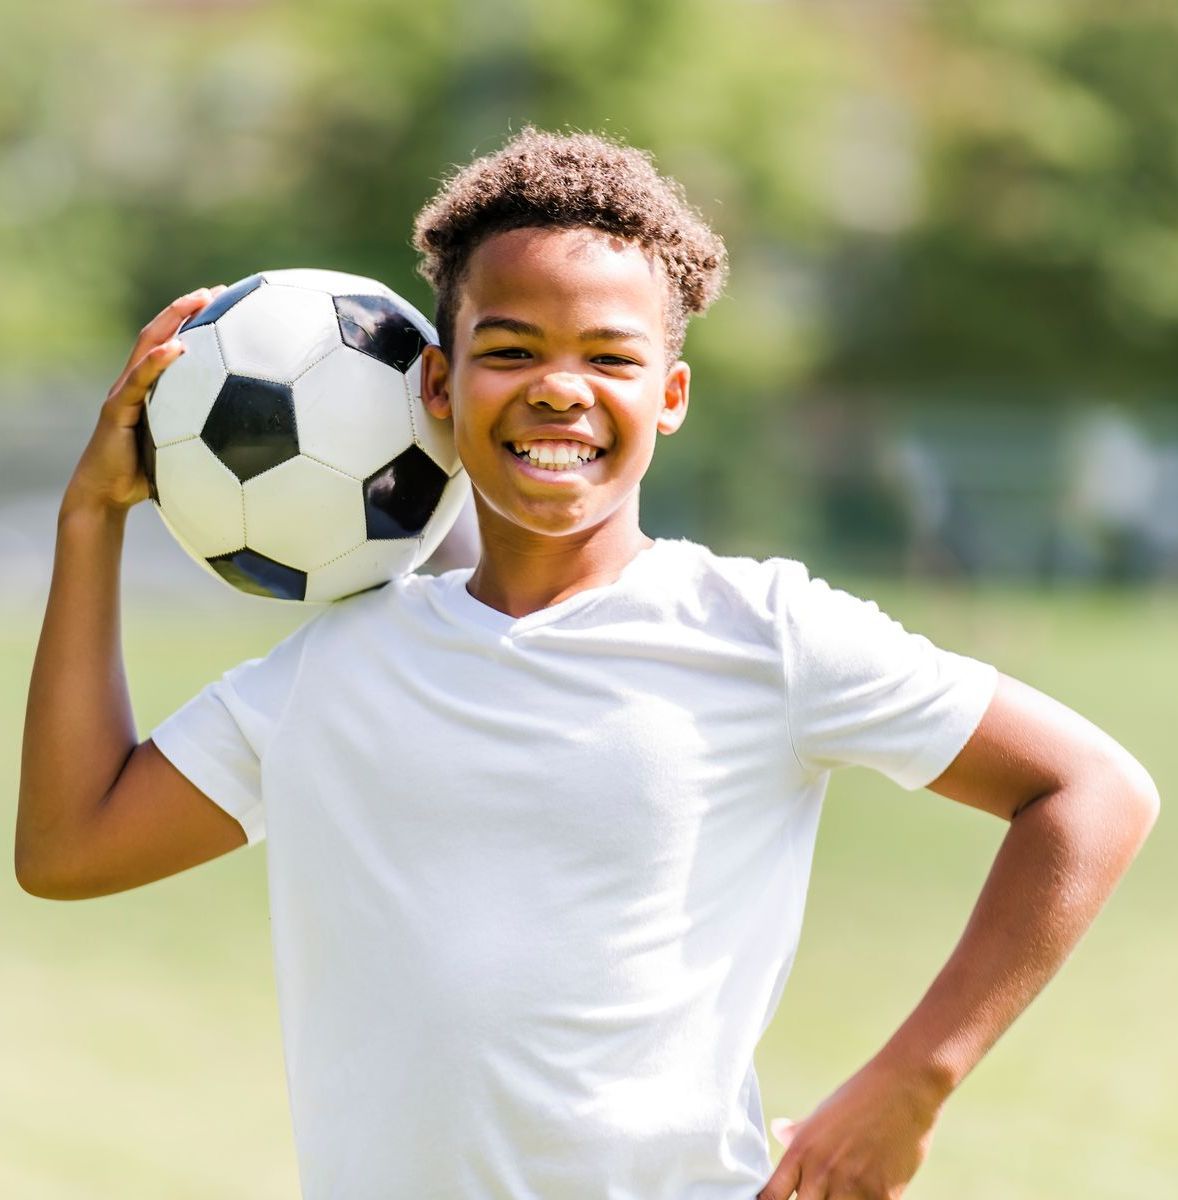 image of a young black male teen holding a soccer ball up on his shoulder smiling.